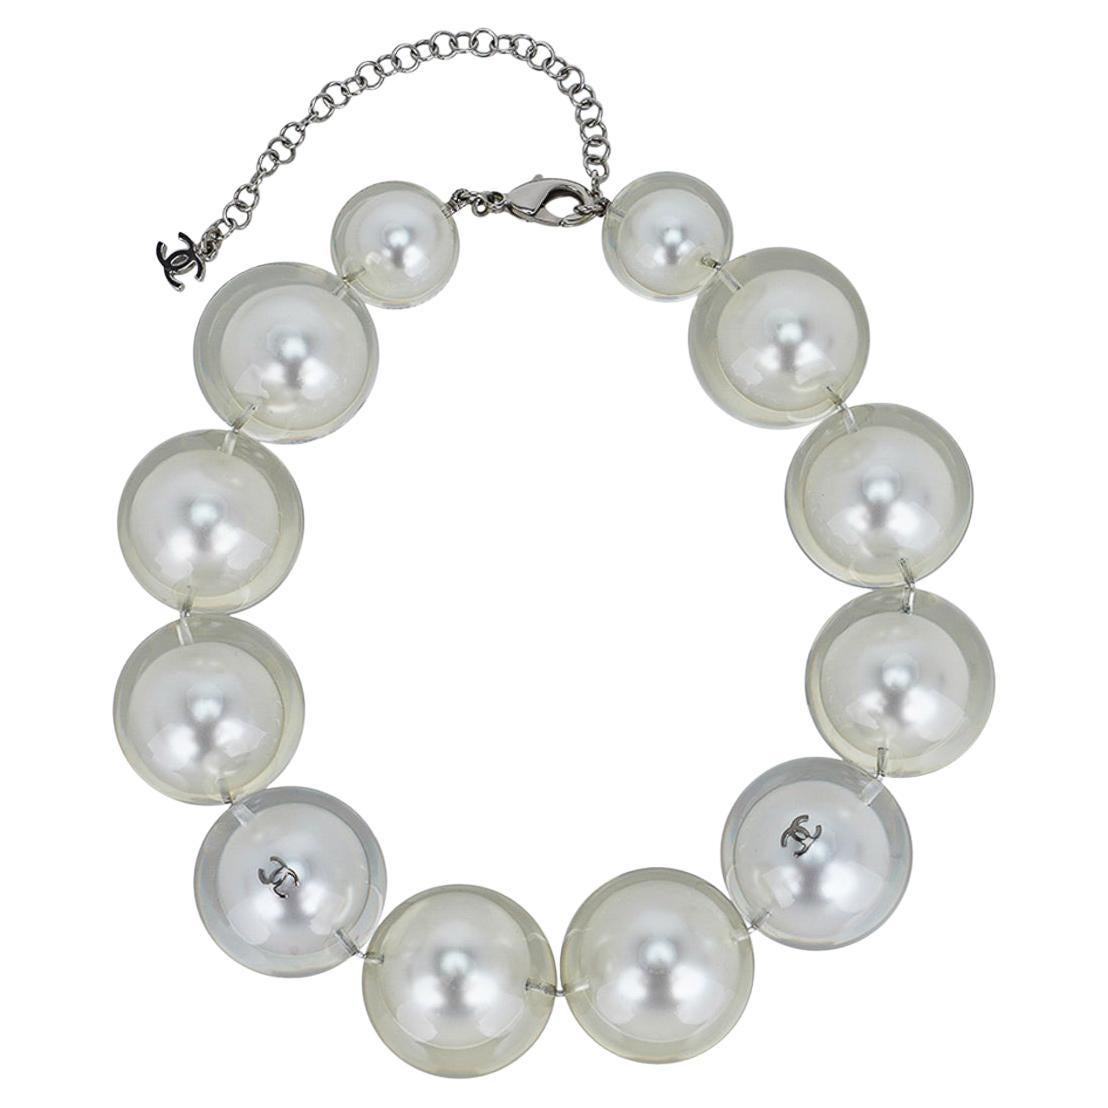 Chanel Limited Edition Karl Lagerfeld Pearl Choker Resin Coated 2017 For Sale